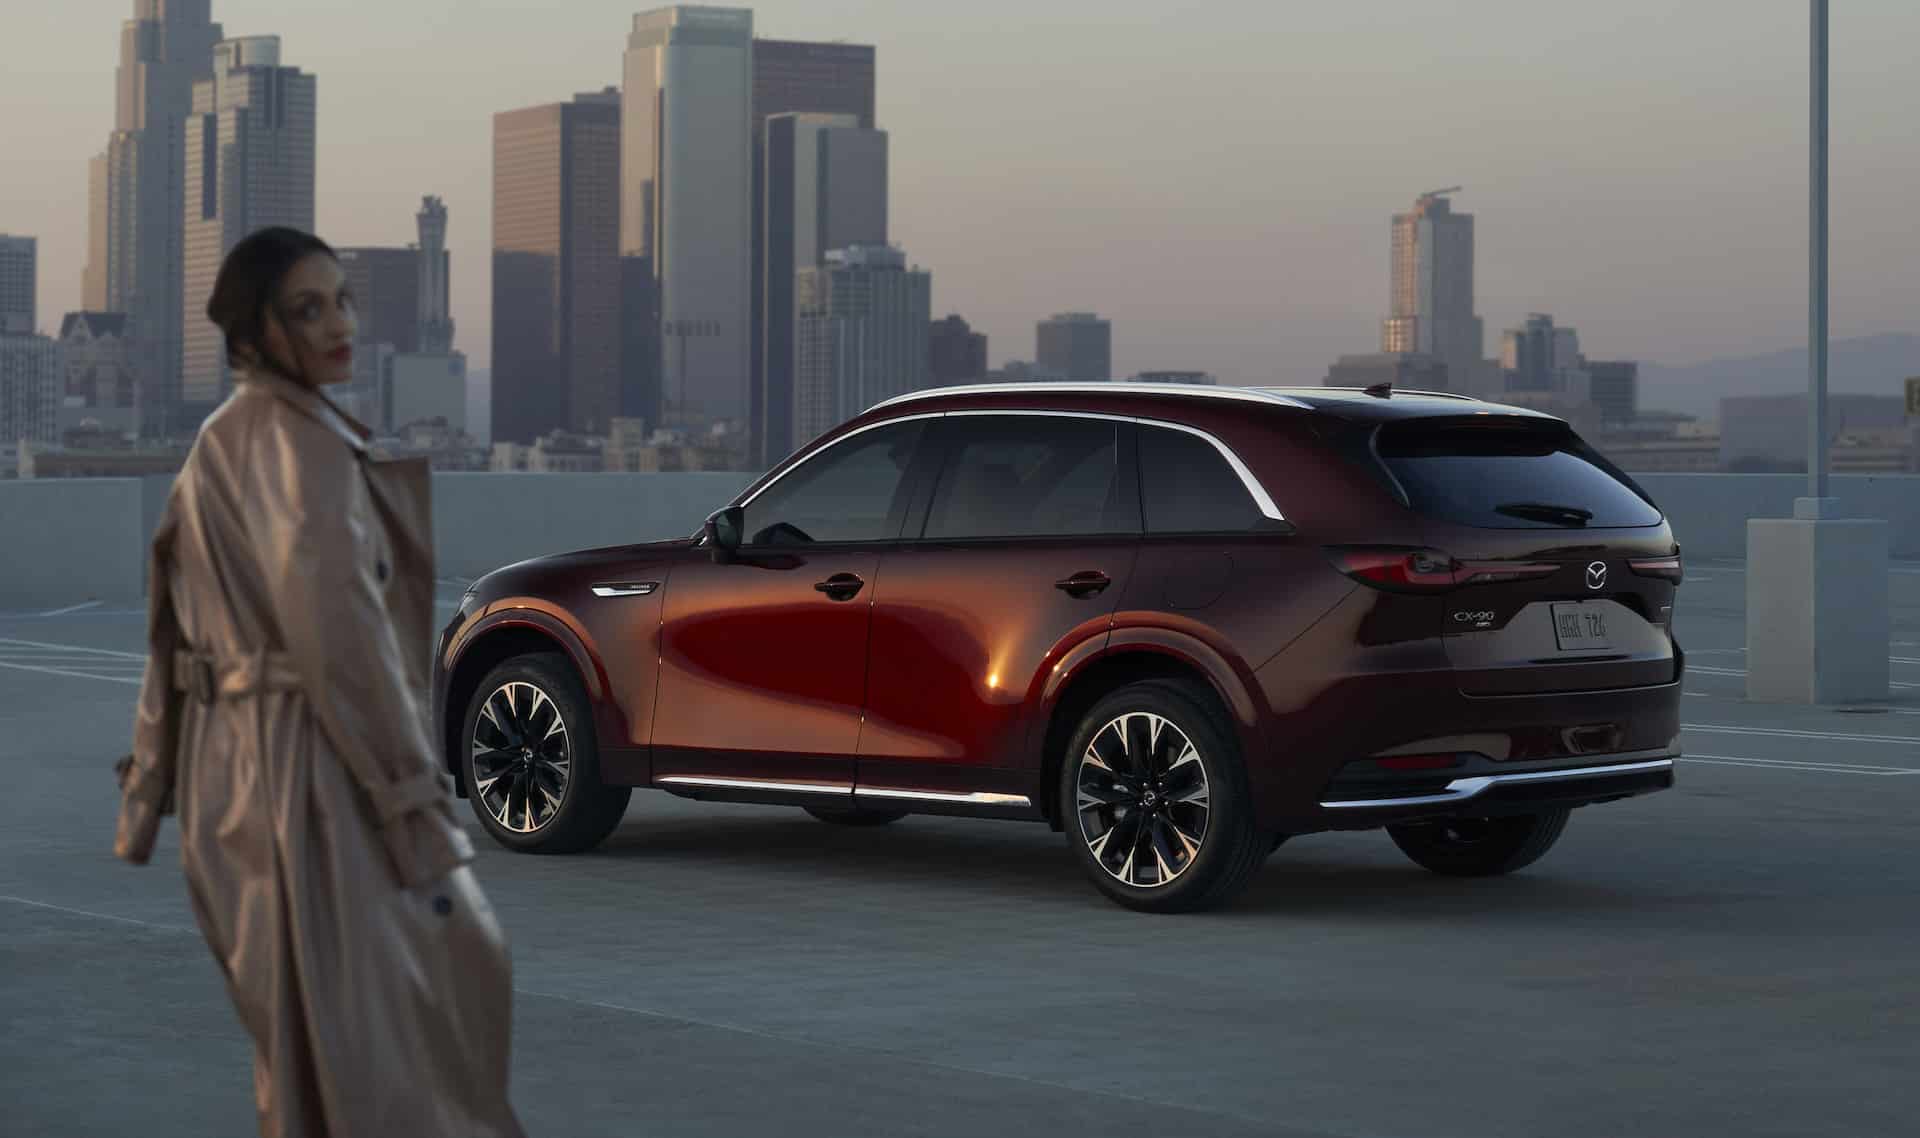 Mazda Unveils the All-New CX-90 with Three Electrified Powertrains and Advanced Safety Features